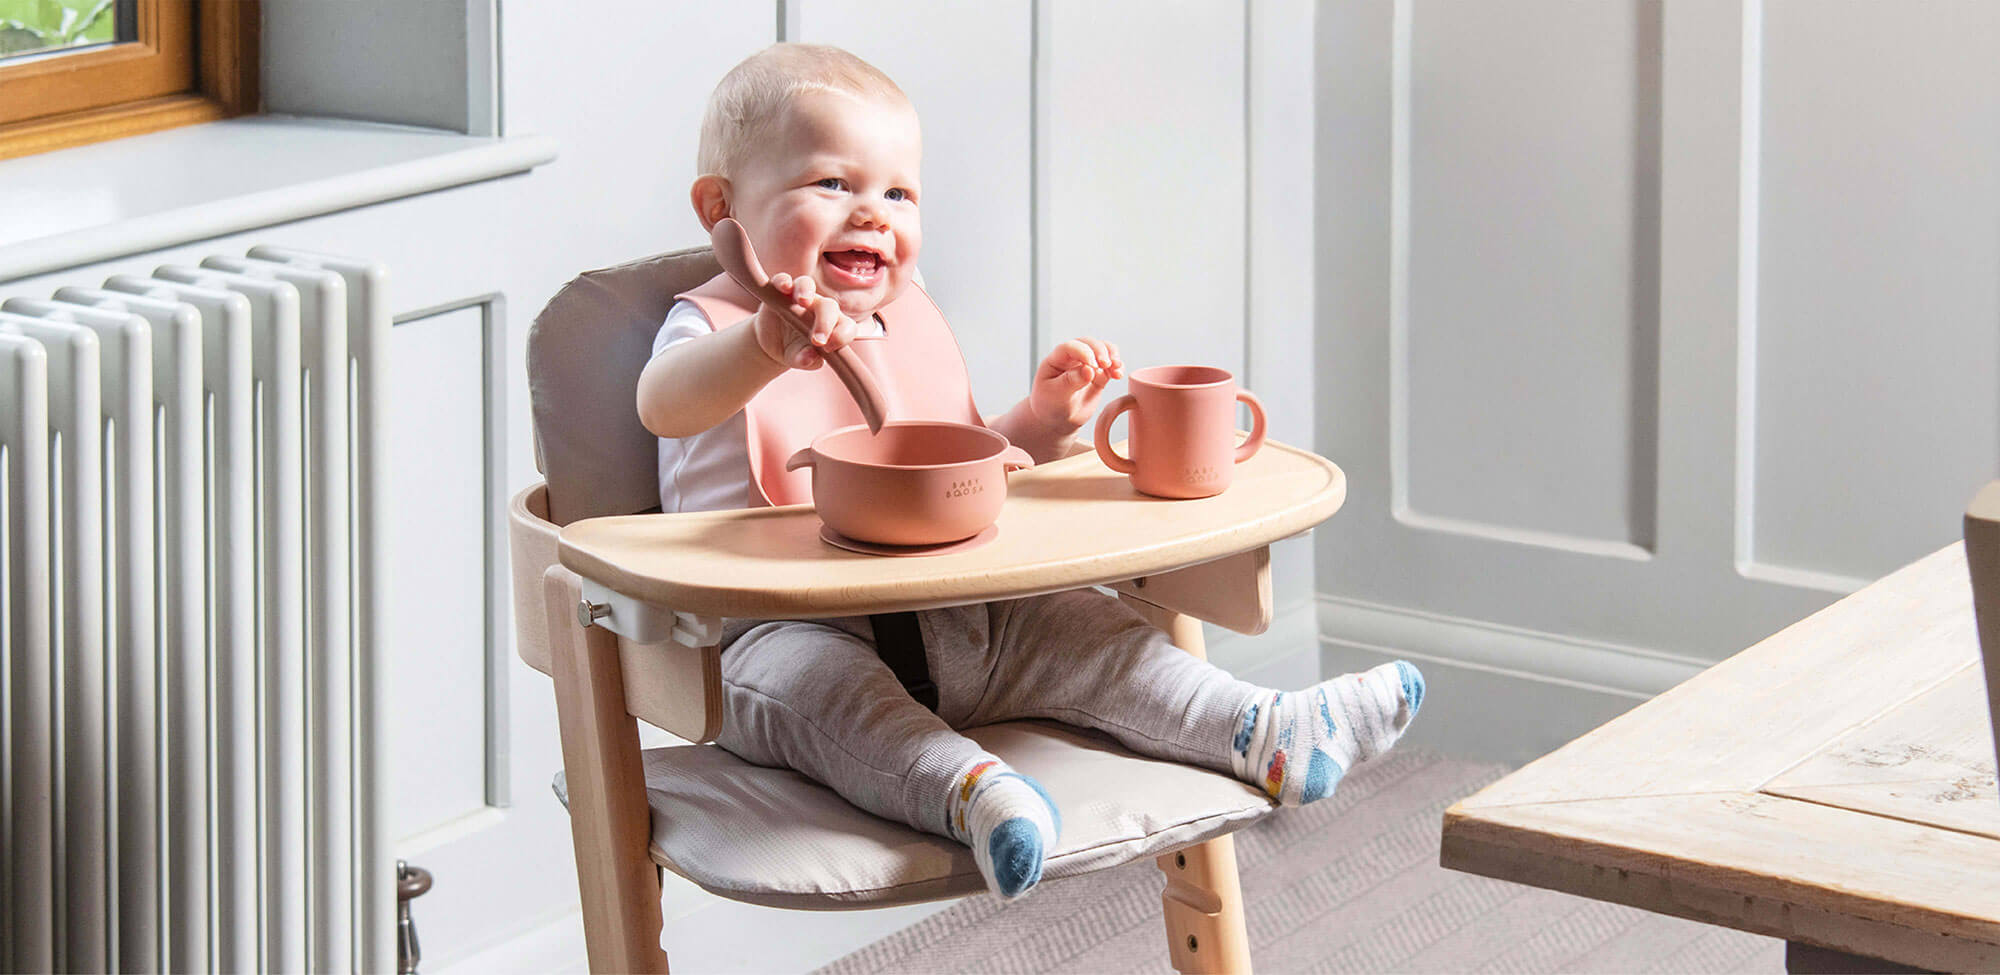 Tidy highchair with padded seat cushions